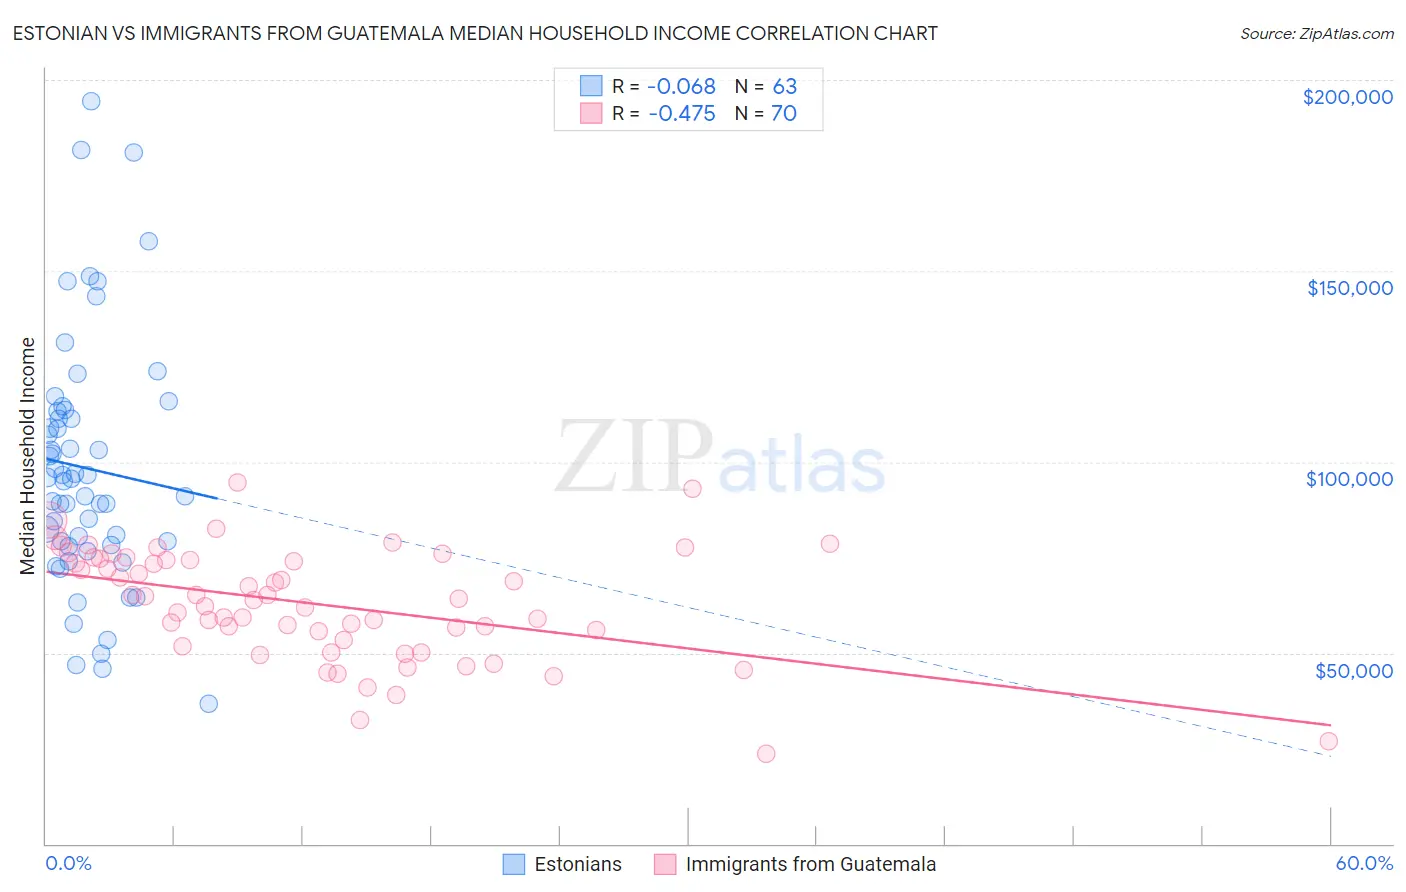 Estonian vs Immigrants from Guatemala Median Household Income